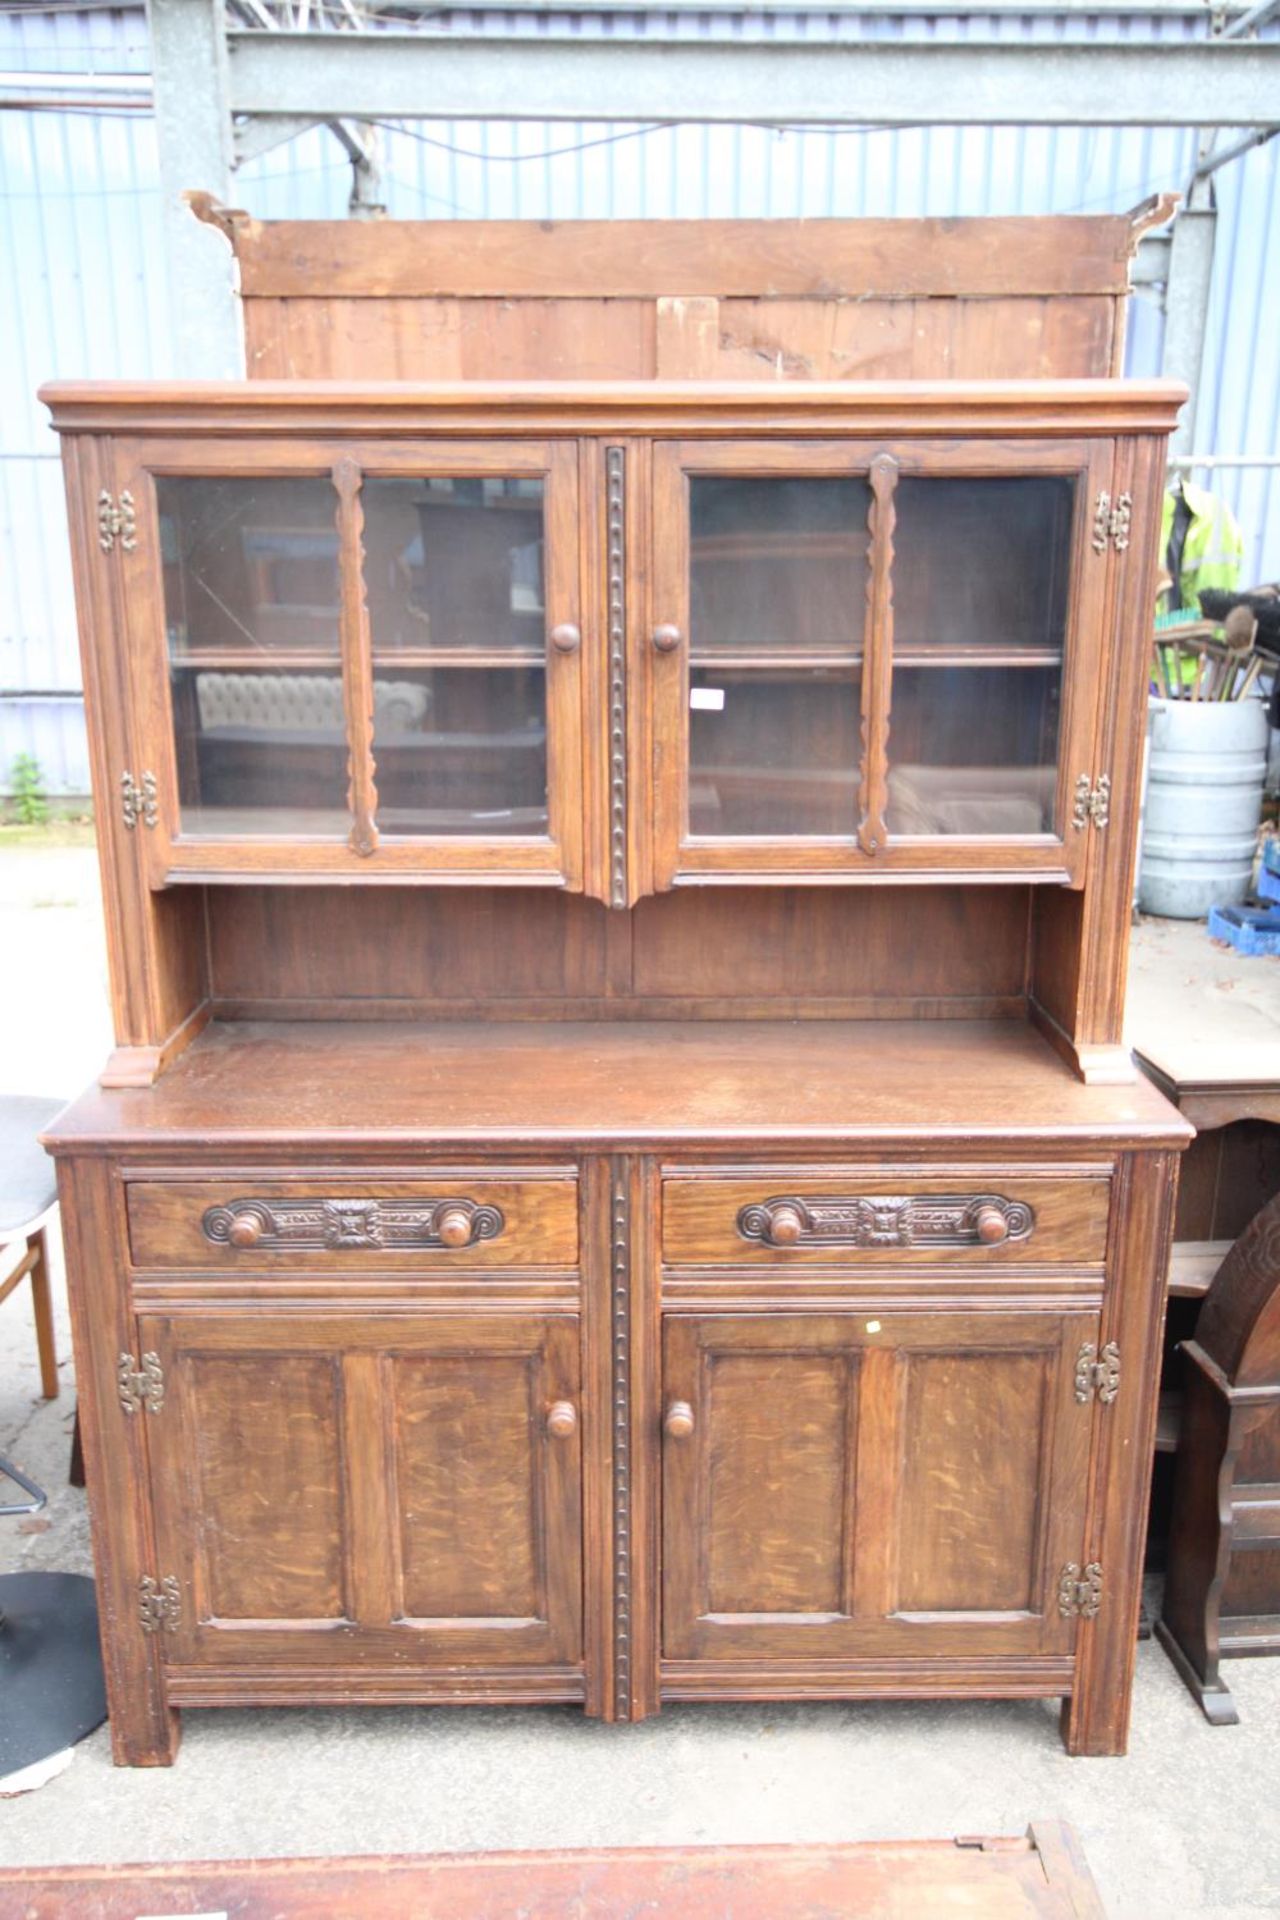 AN OAK AND BEECH E.GOMME FURNITURE DRESSER WITH GLAZED UPPER PORTION 55" WIDE